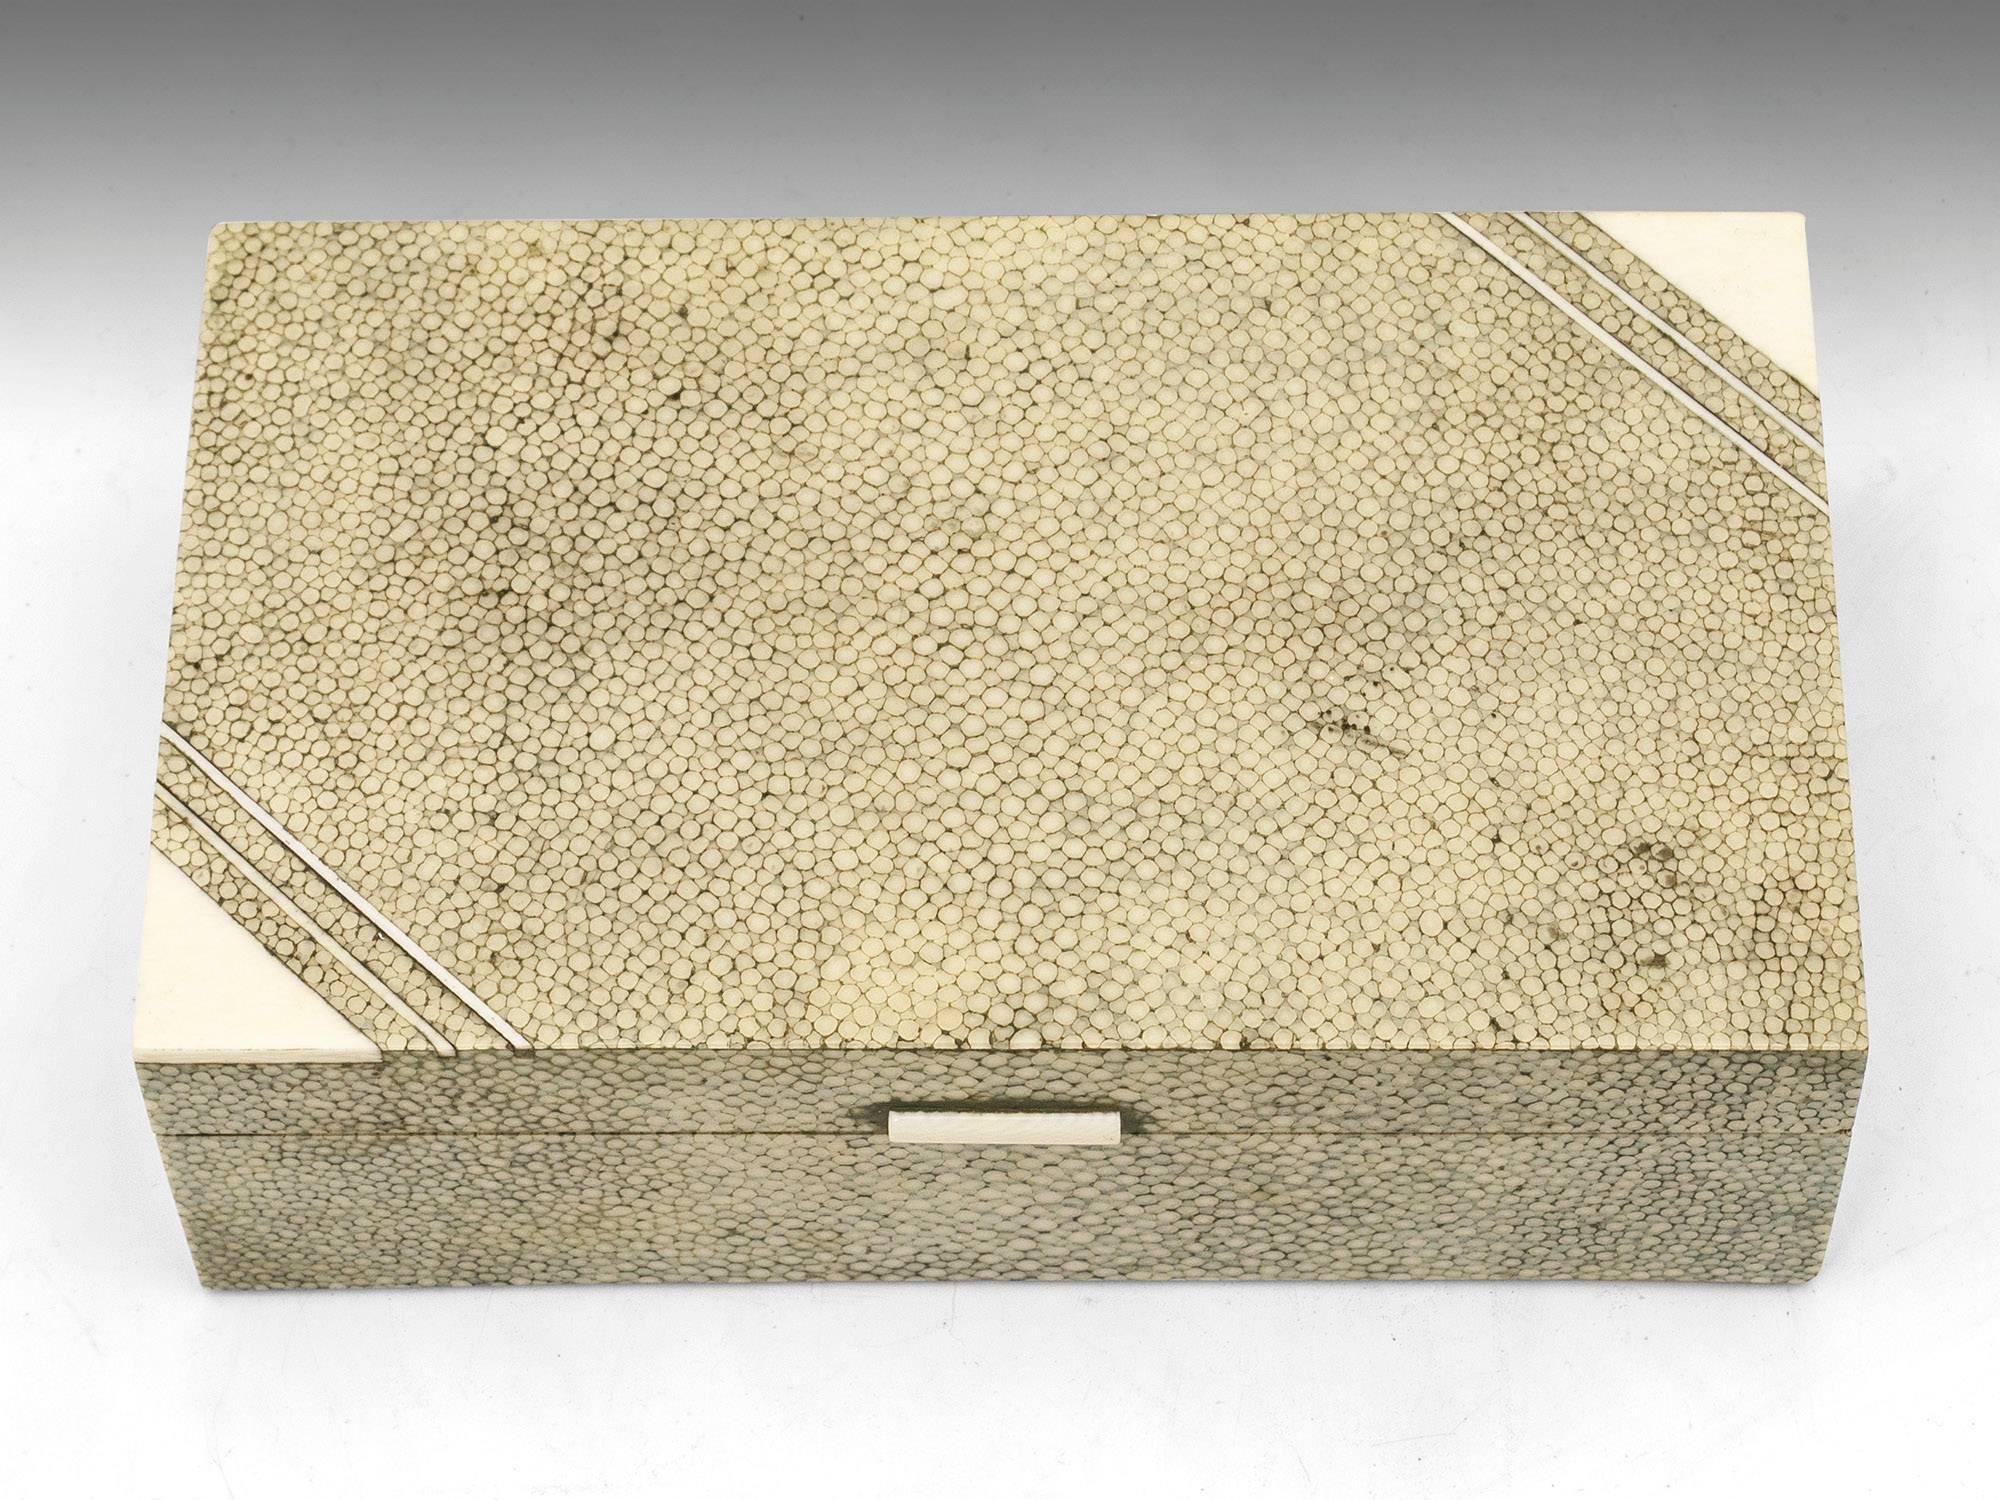 Art Deco shagreen cigarette box with ivory stringing and corner accents. 

The interior is lined with cedar wood and features a removable compartment divider. 

Shagreen is a leather made from sharkskin or the skin of a stingray. This type of